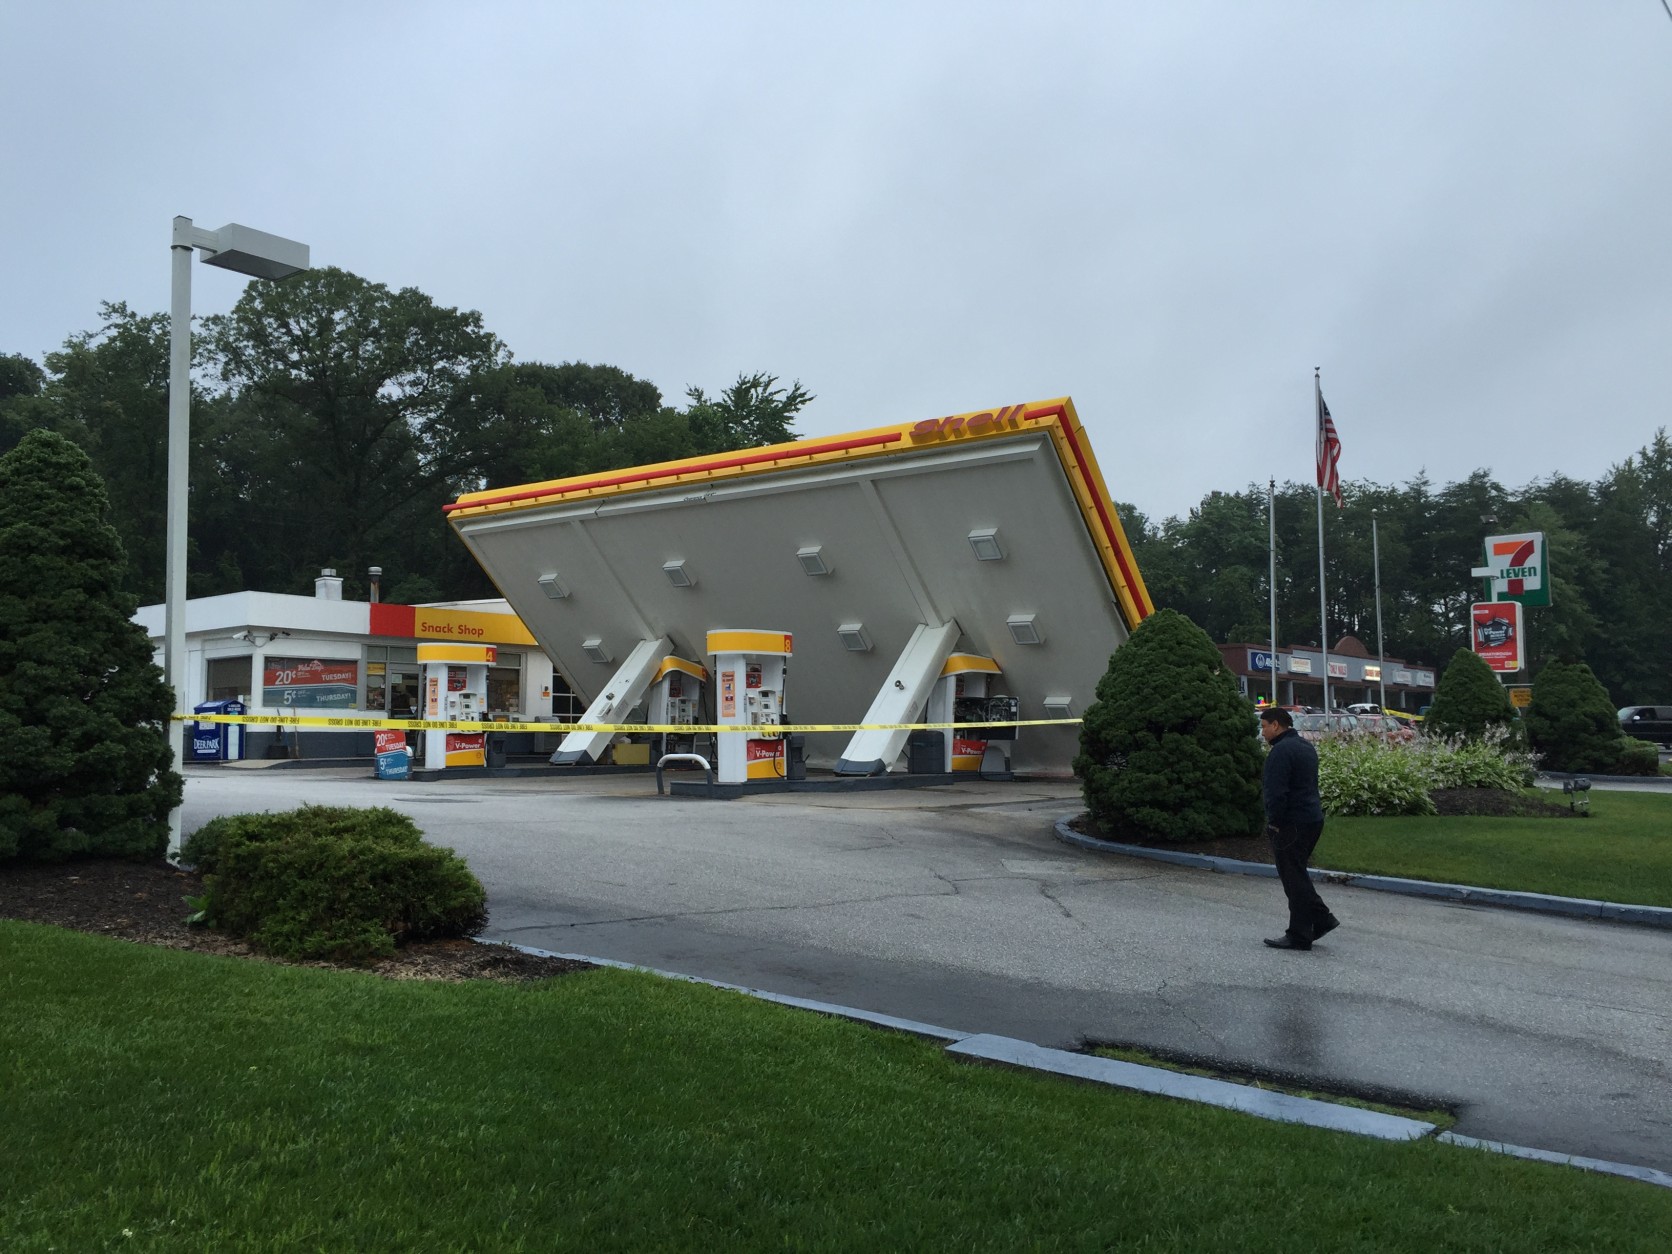 Severe weather knocked over the canopy at a Shell station in Bowie, Maryland July 1, 2015. (WTOP/Kristi King)